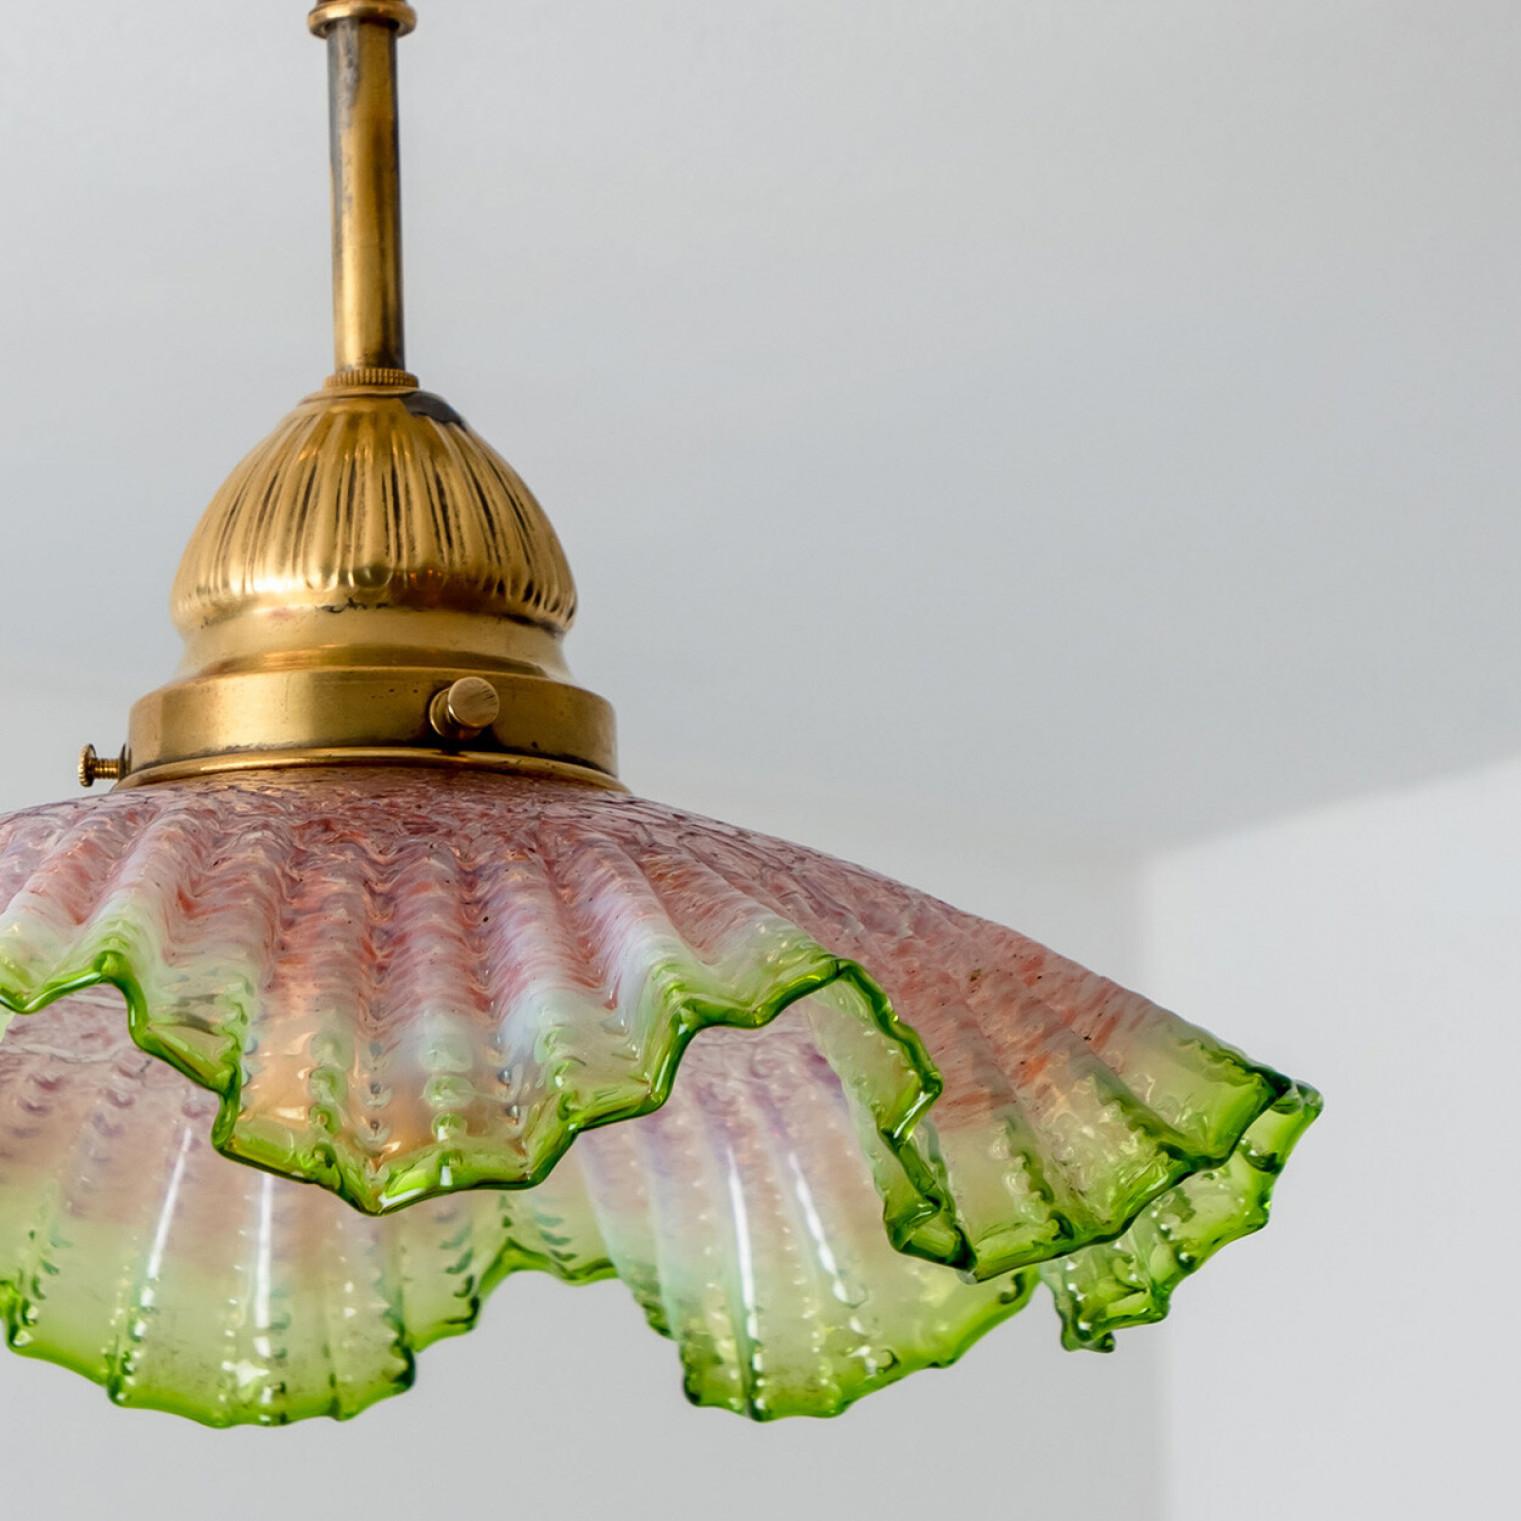 Pair of lovely antique lampshade in beautiful pink and green in the centre with wavy / scalloped edges,  with brass holder
Origin France, ca 1910s - 1930s. High-end pieces.

Dimensions:
Height: 11.8 